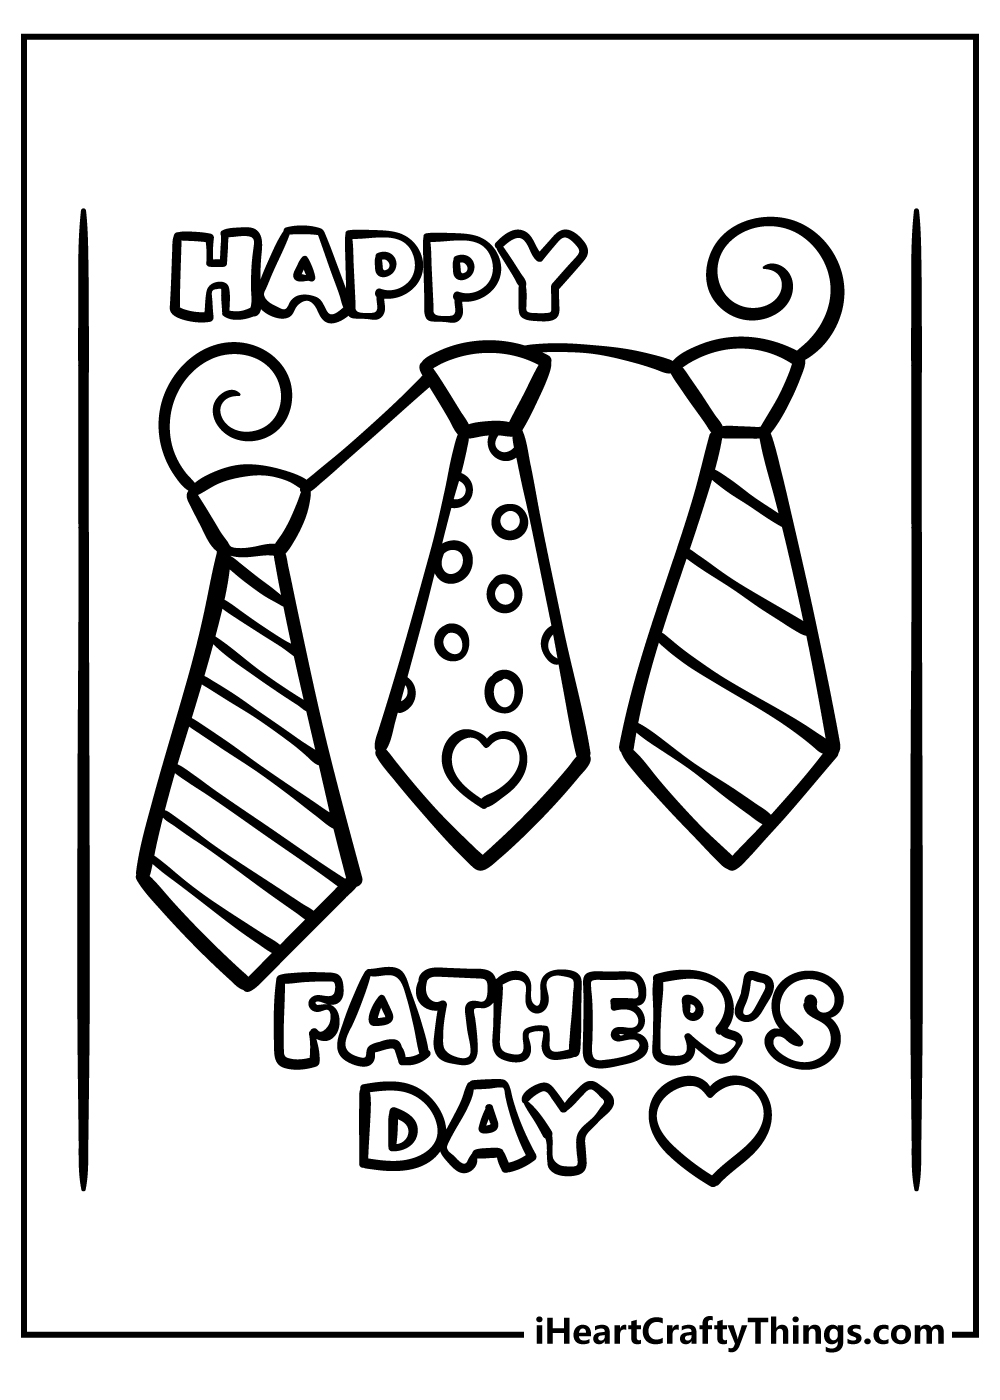 Father’s Day Coloring Pages for kids free download